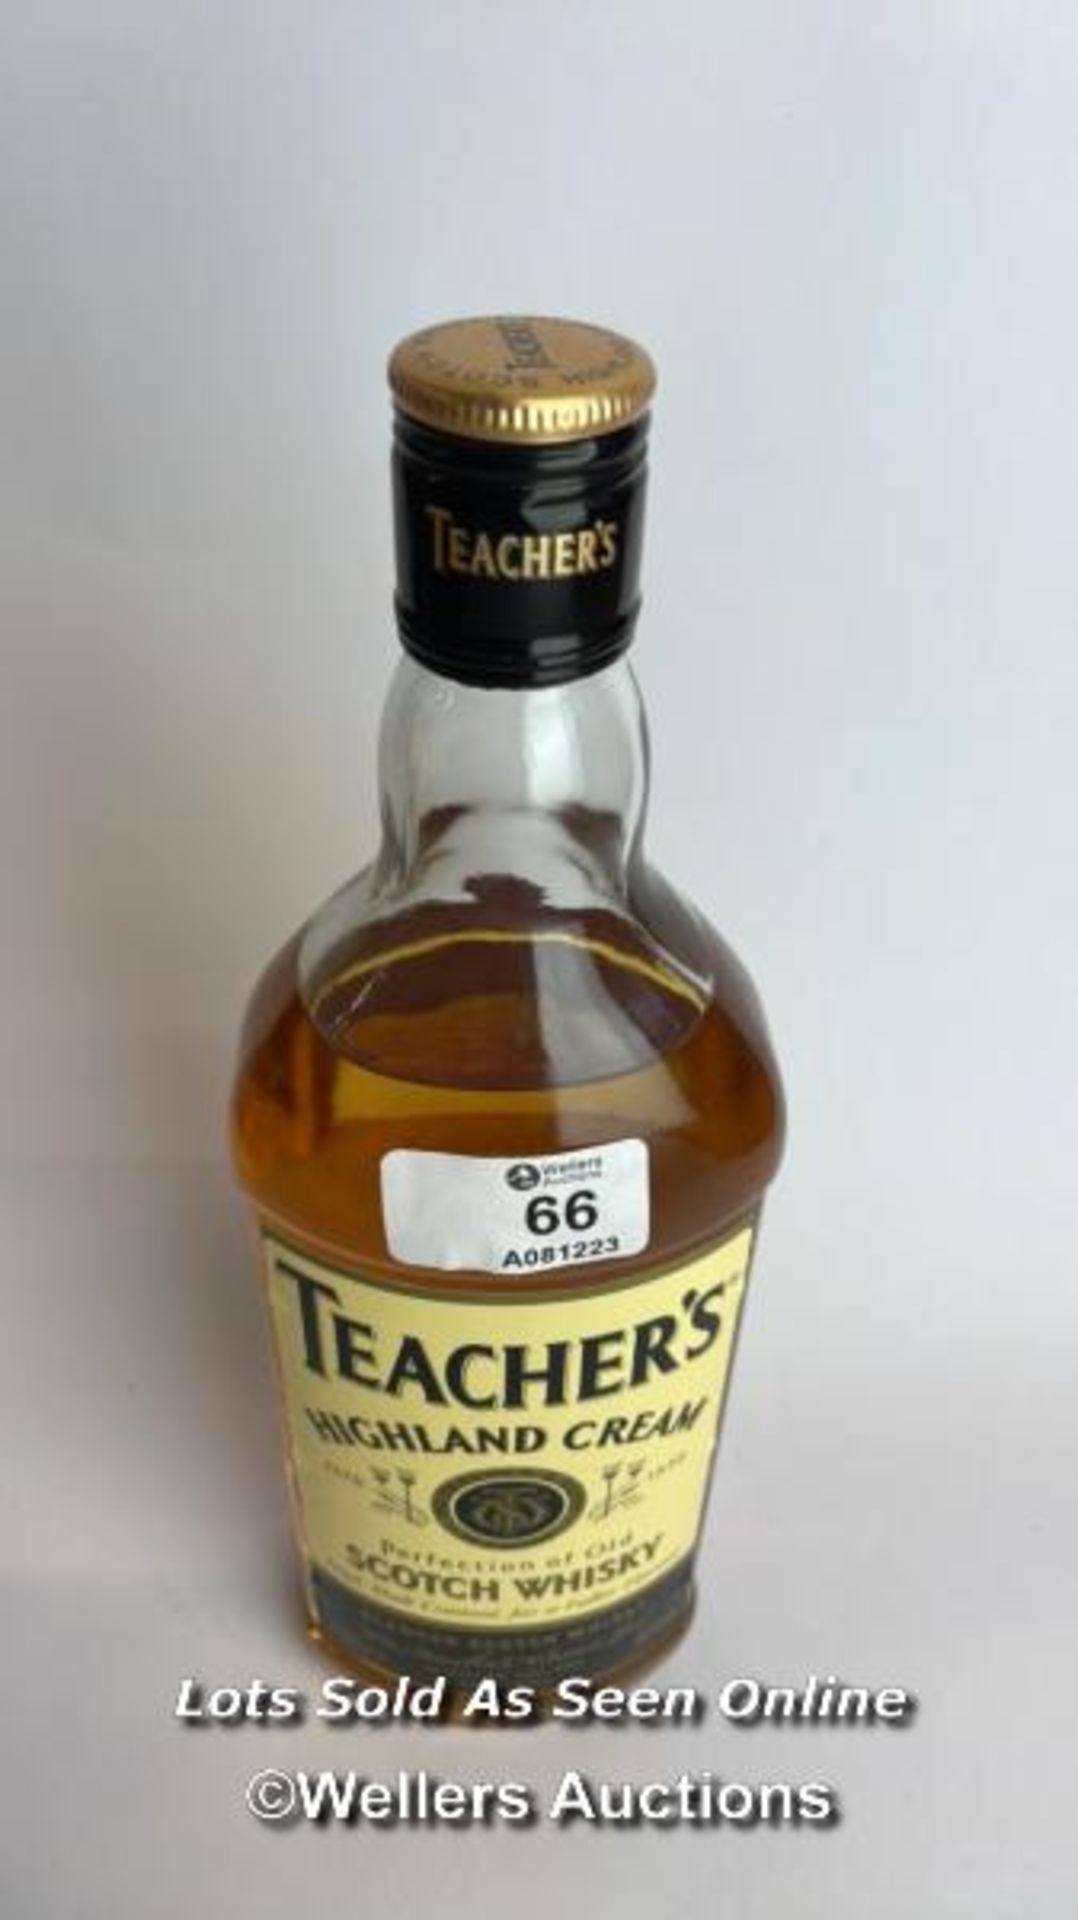 Teachers Highland Cream Scotch Whisky, 70cl, 43% vol / Please see images for fill level and - Image 3 of 5